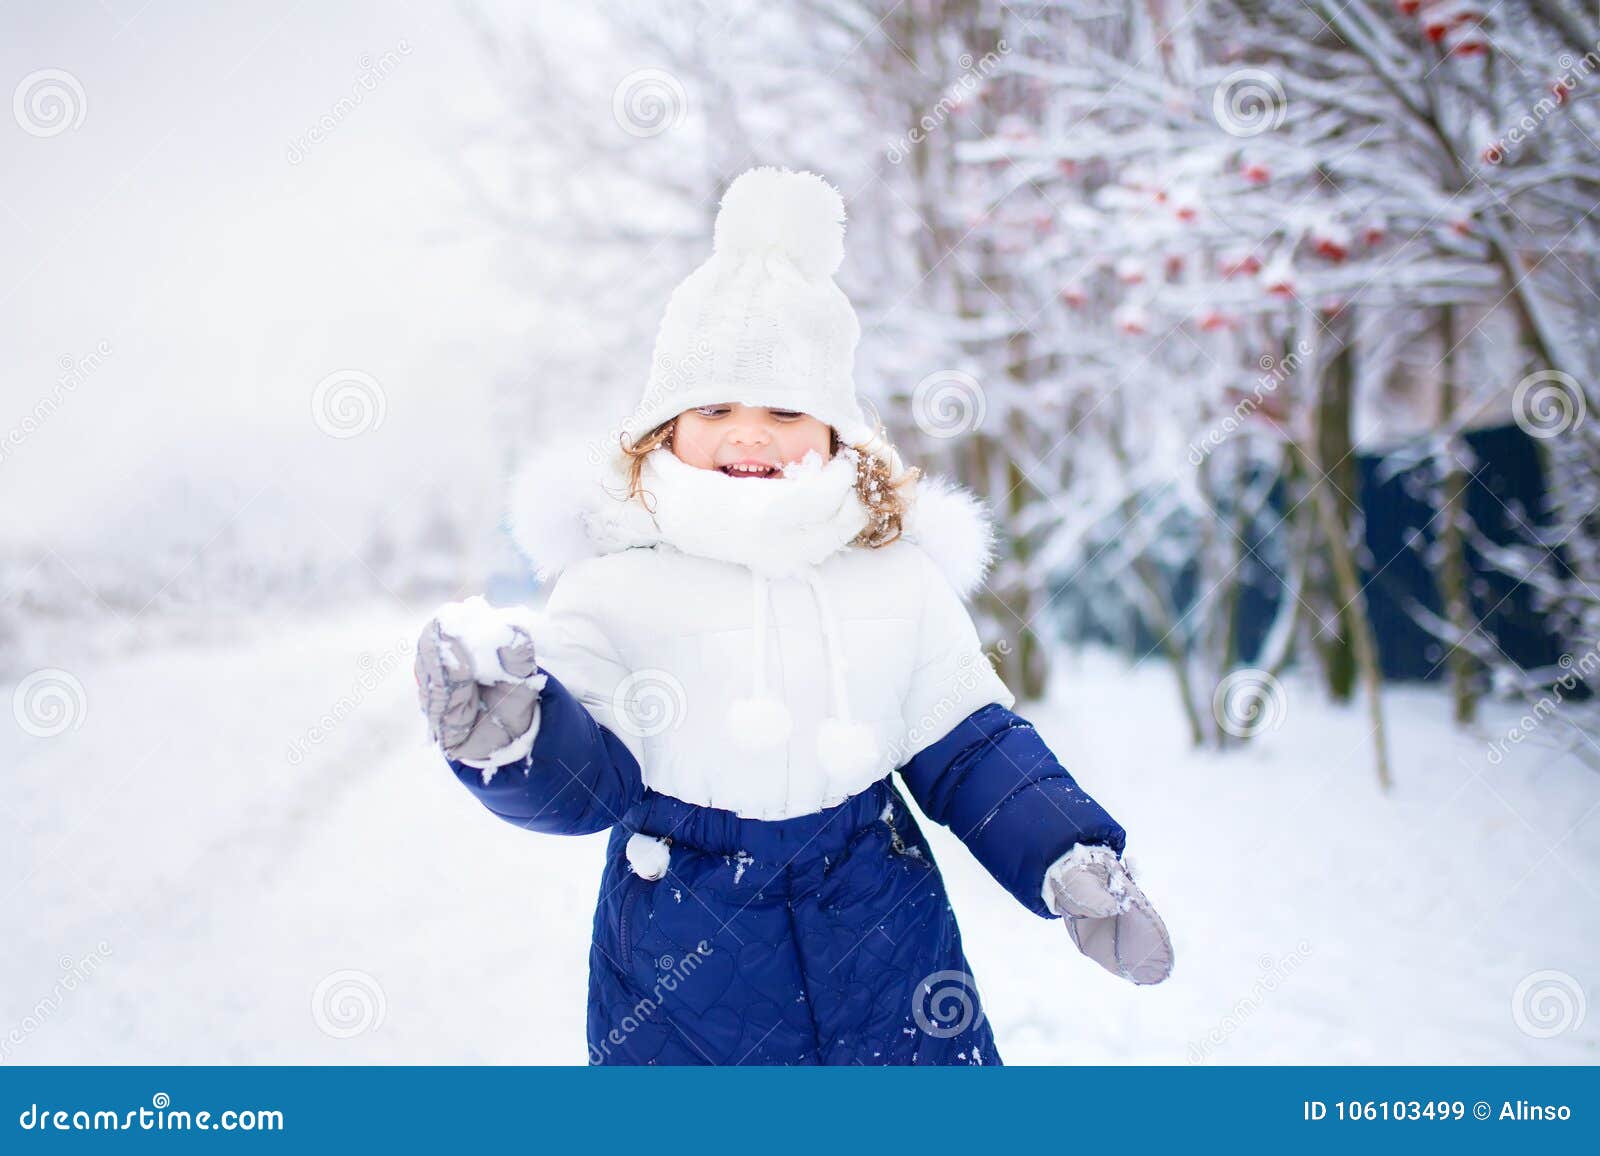 Little Girl Playing Snowballs, Winter Activity. Stock Image - Image of ...